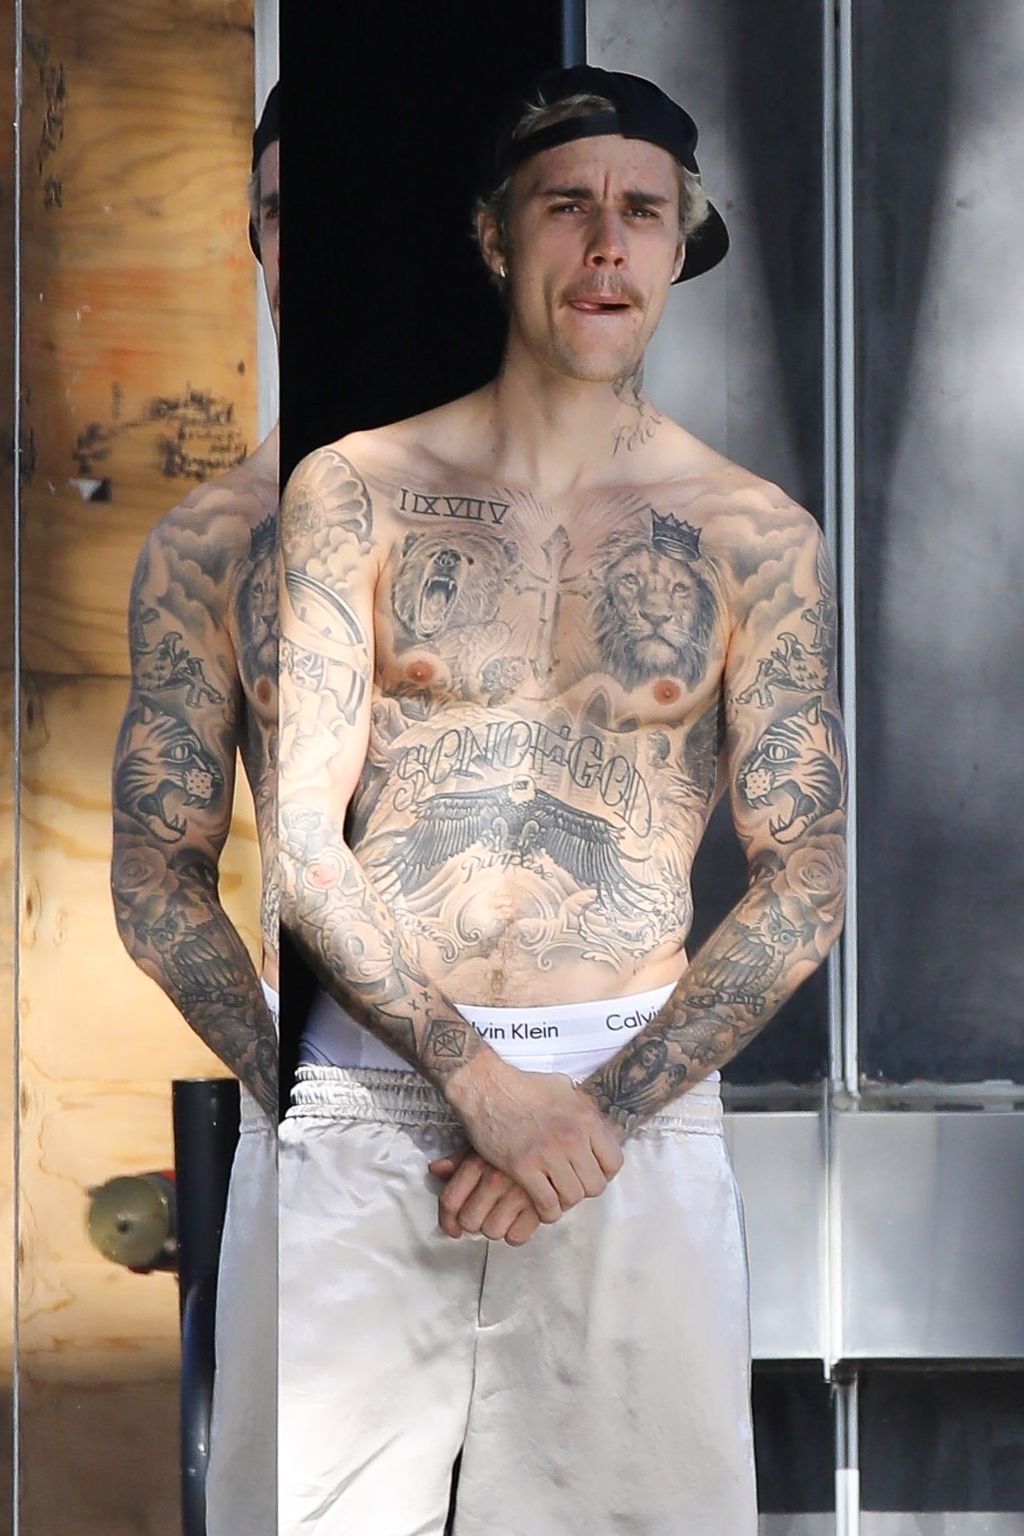 When Justin Bieber Poses For A Oh-So-Perfect Shirtless Selfie! 1